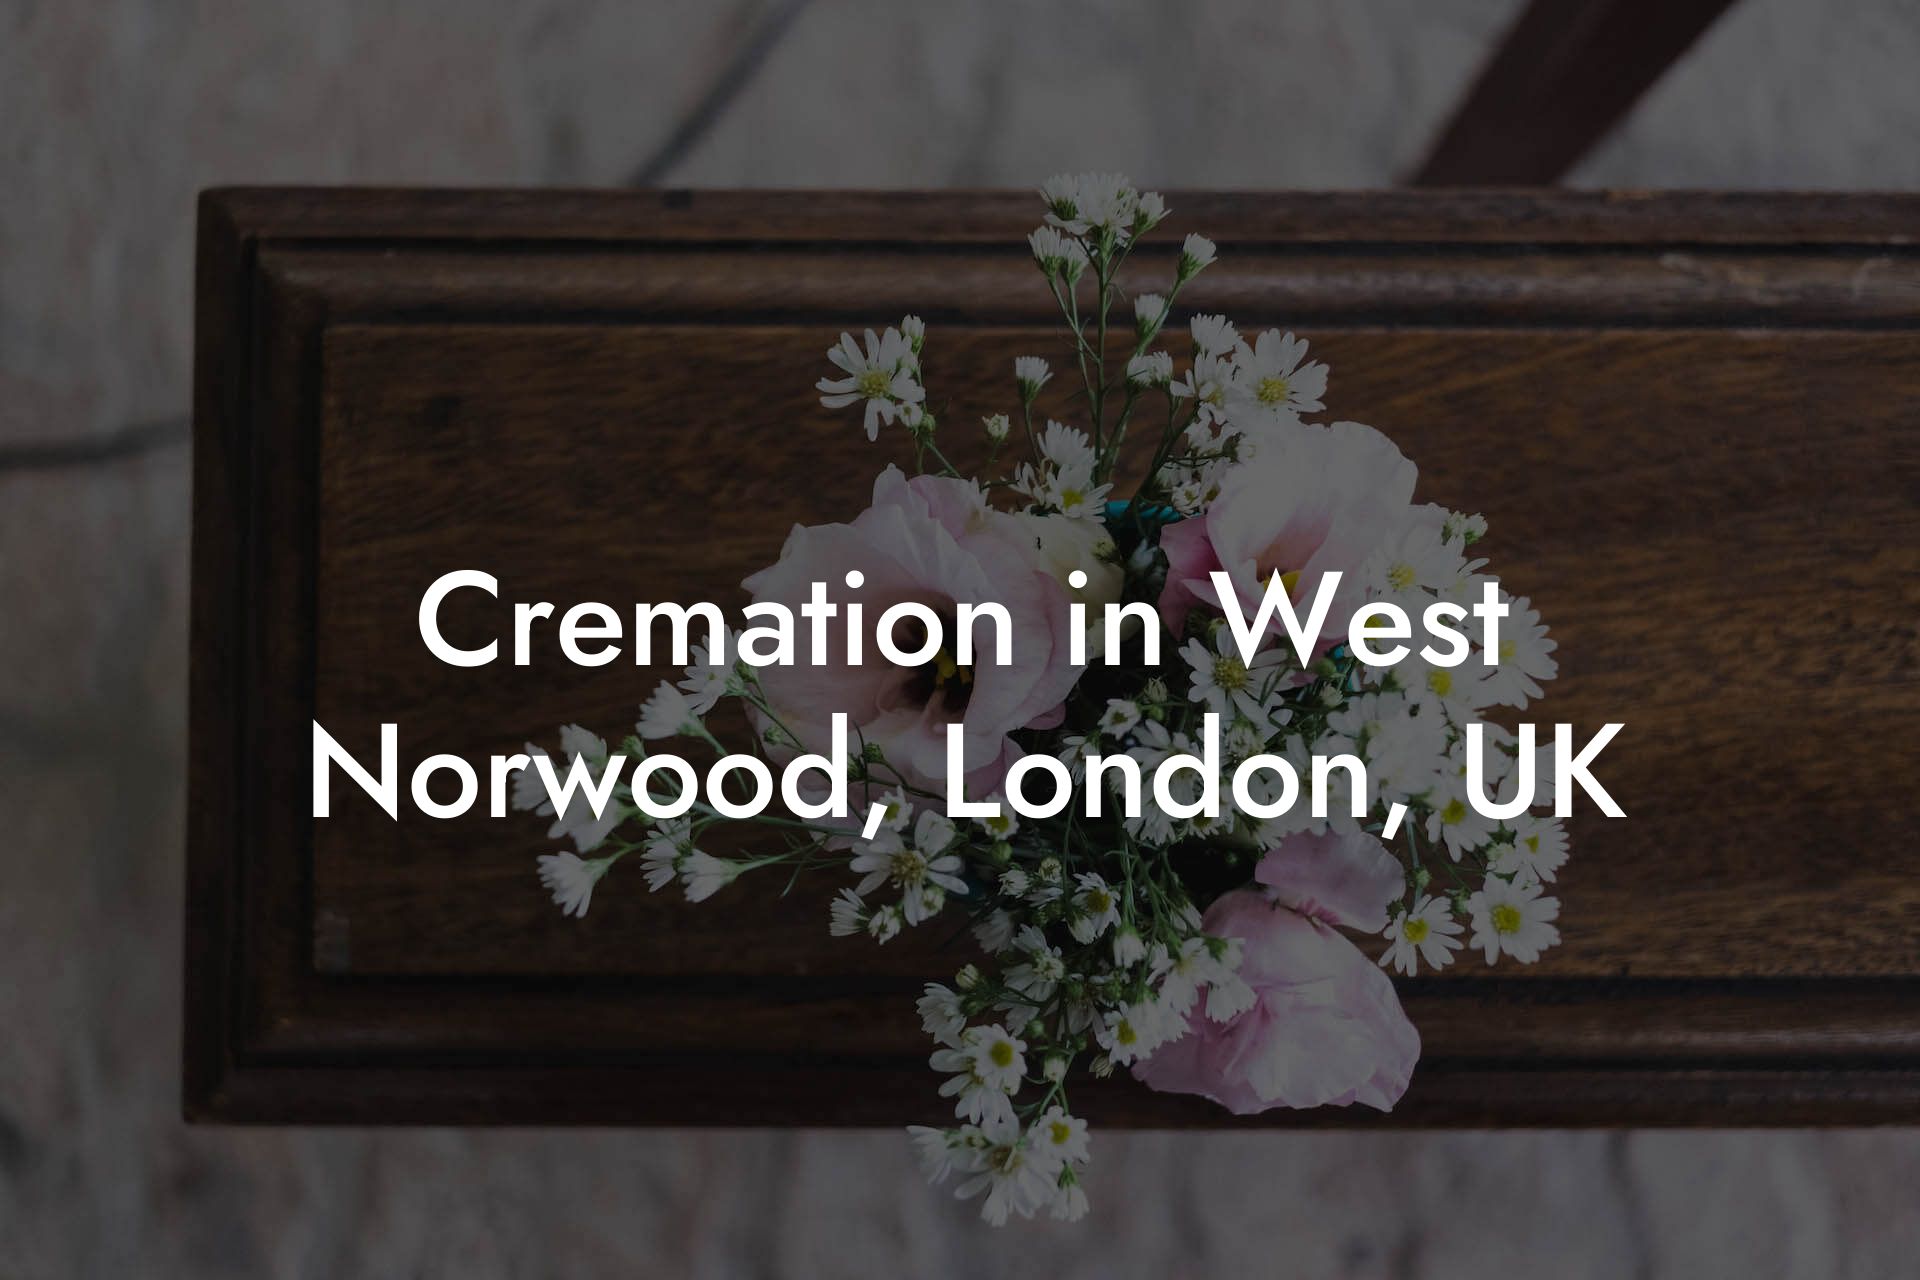 Cremation in West Norwood, London, UK